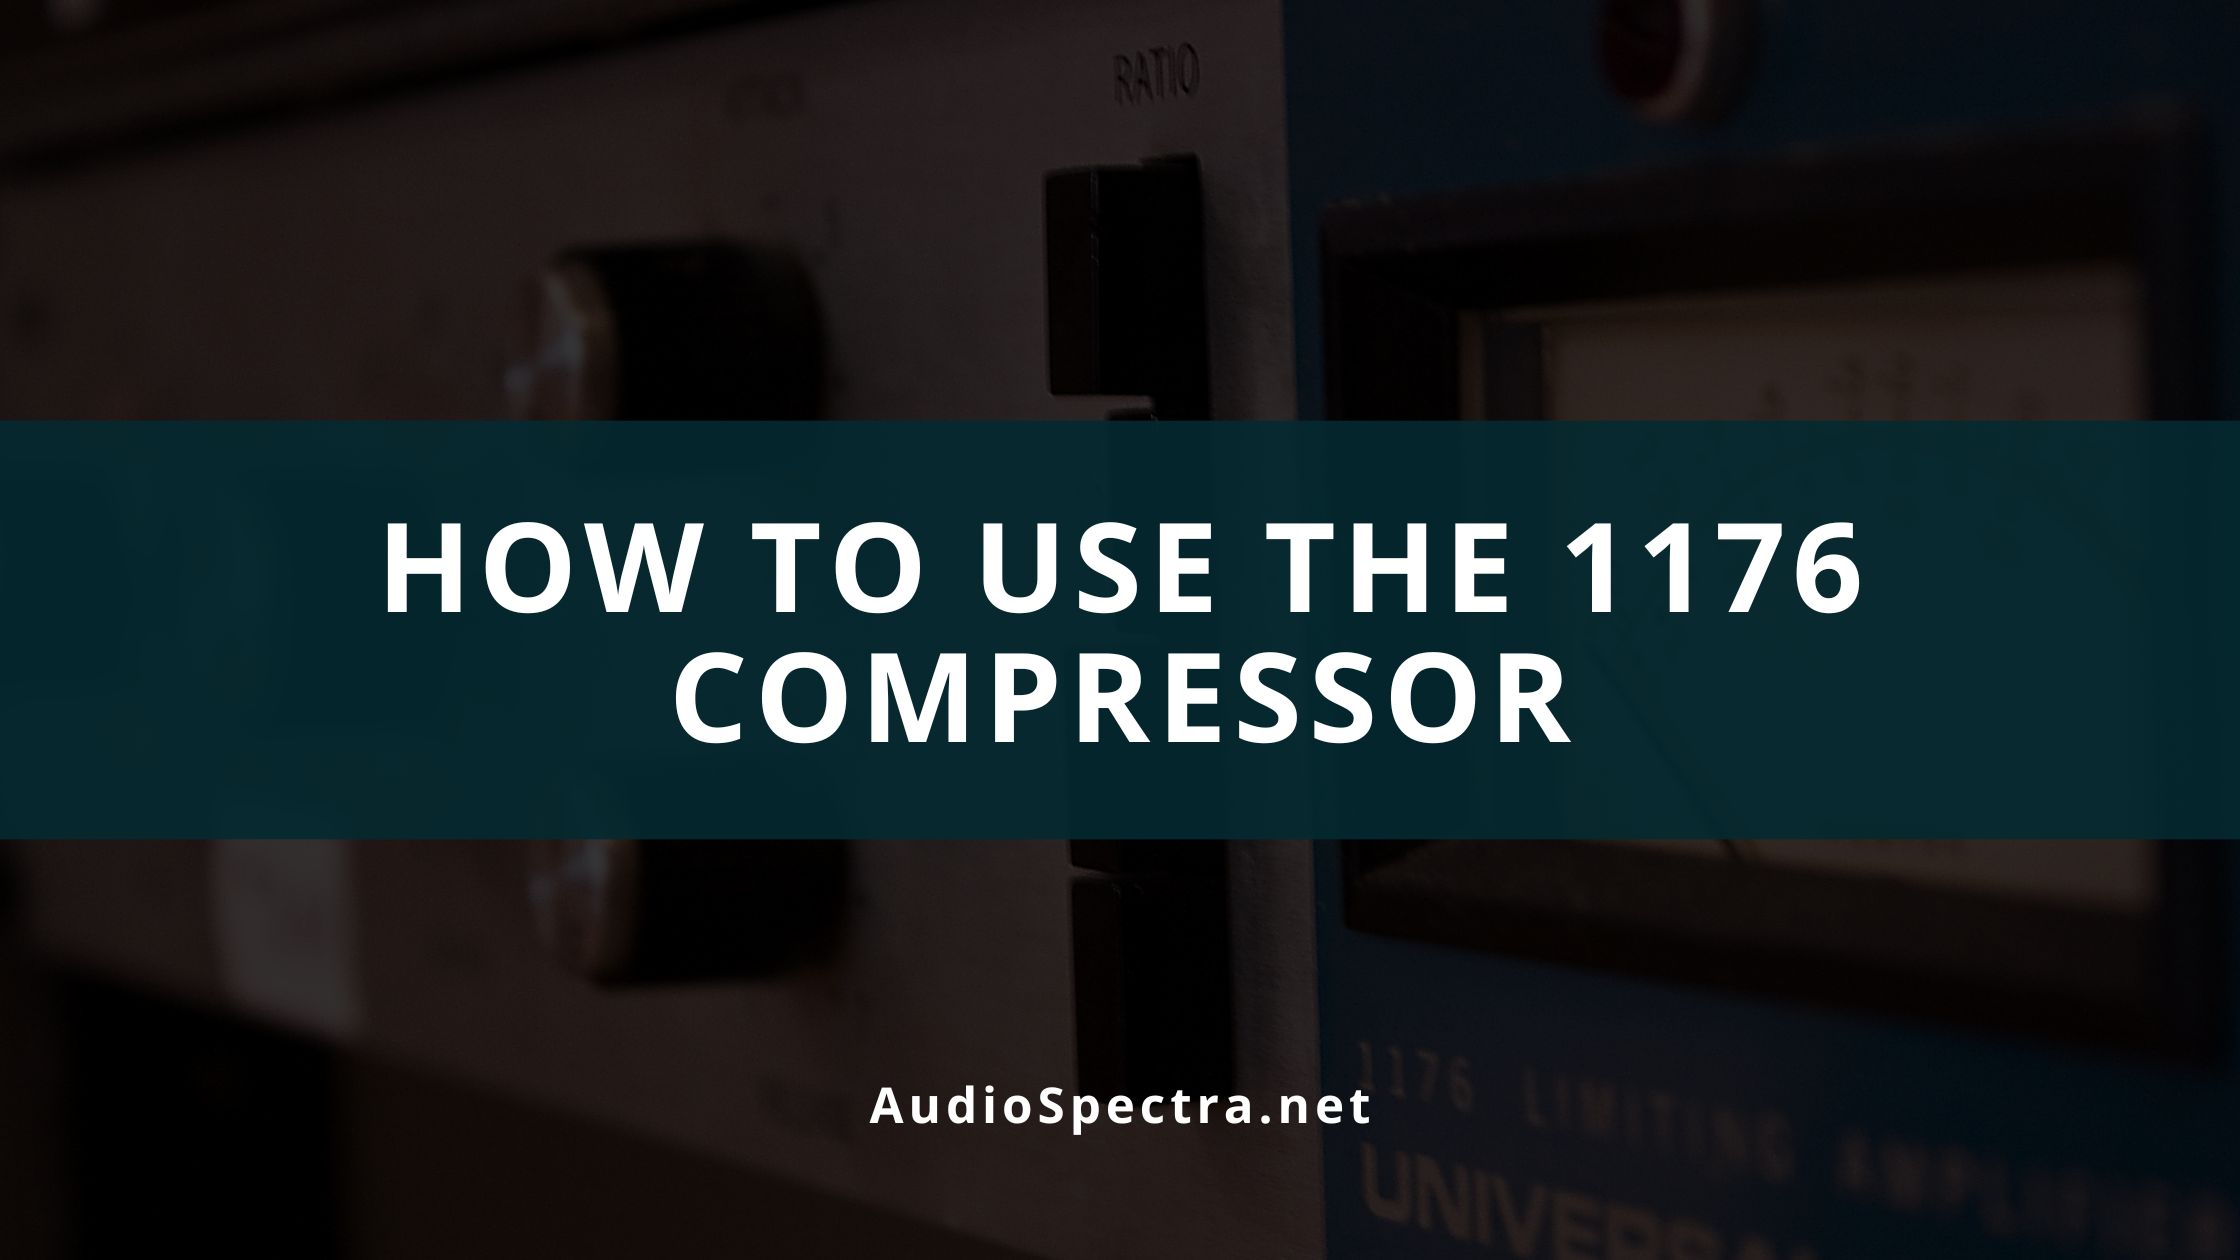 How To Use The 1176 Compressor